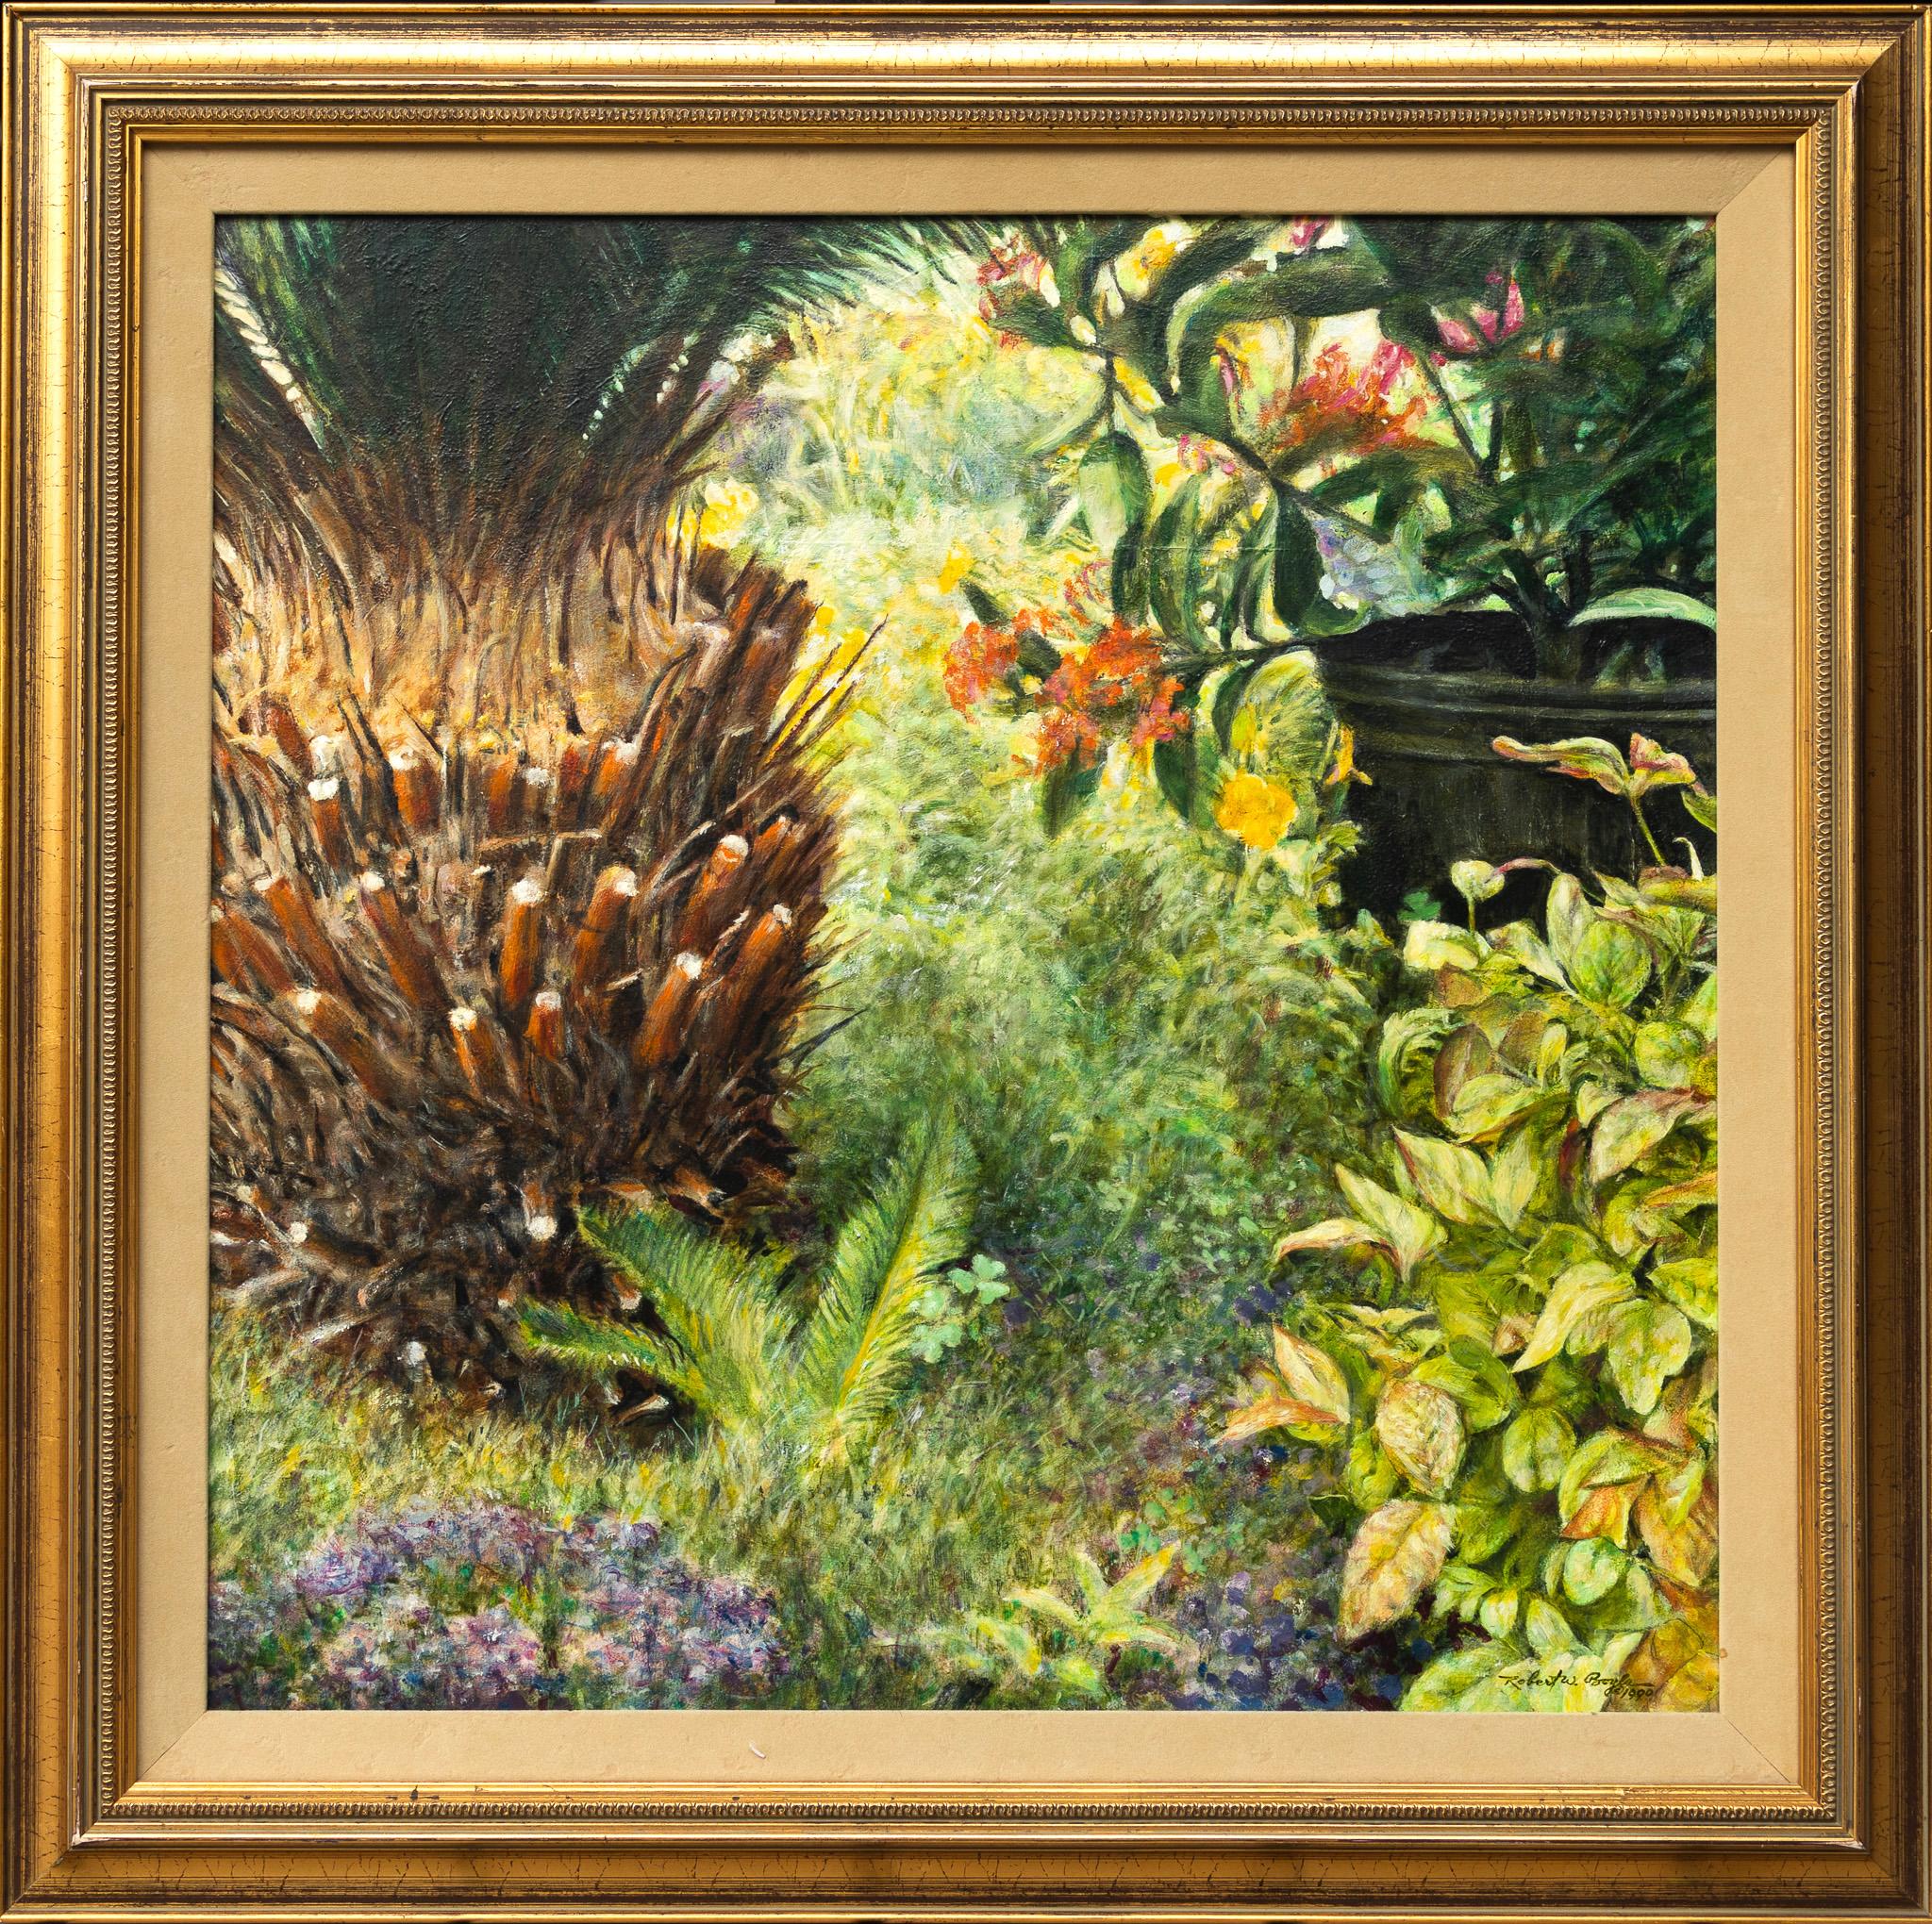 Floral Scene - Painting by Robert W. Boyle